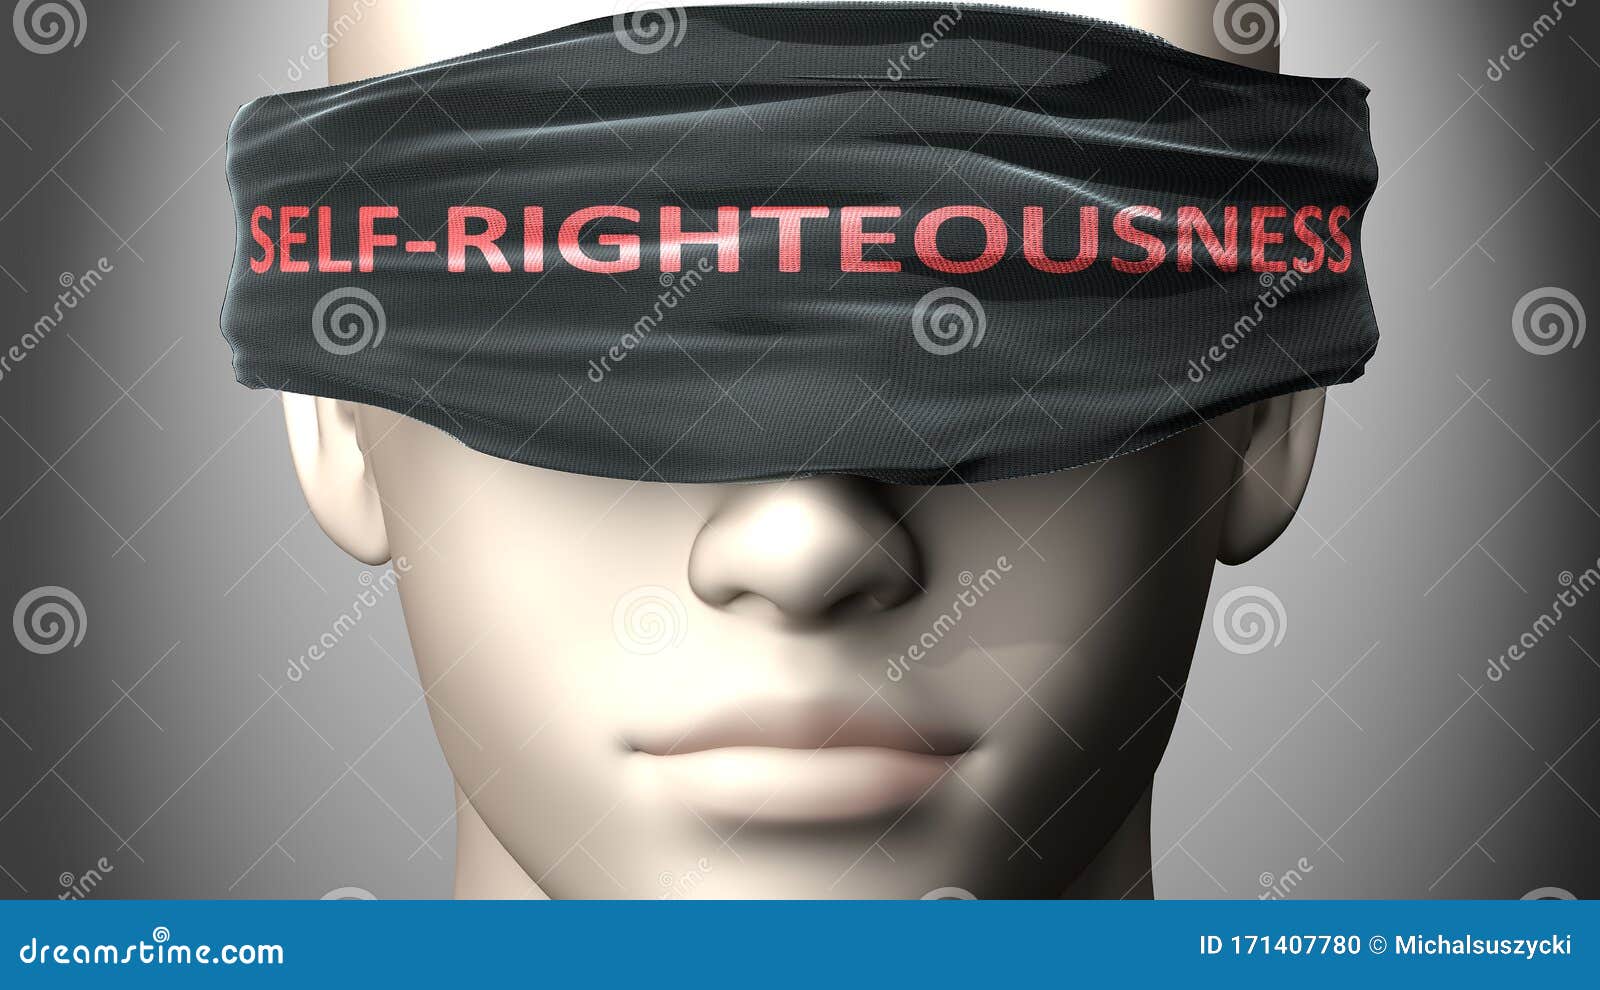 self righteousness can make us blind - pictured as word self righteousness on a blindfold to ize that it can cloud